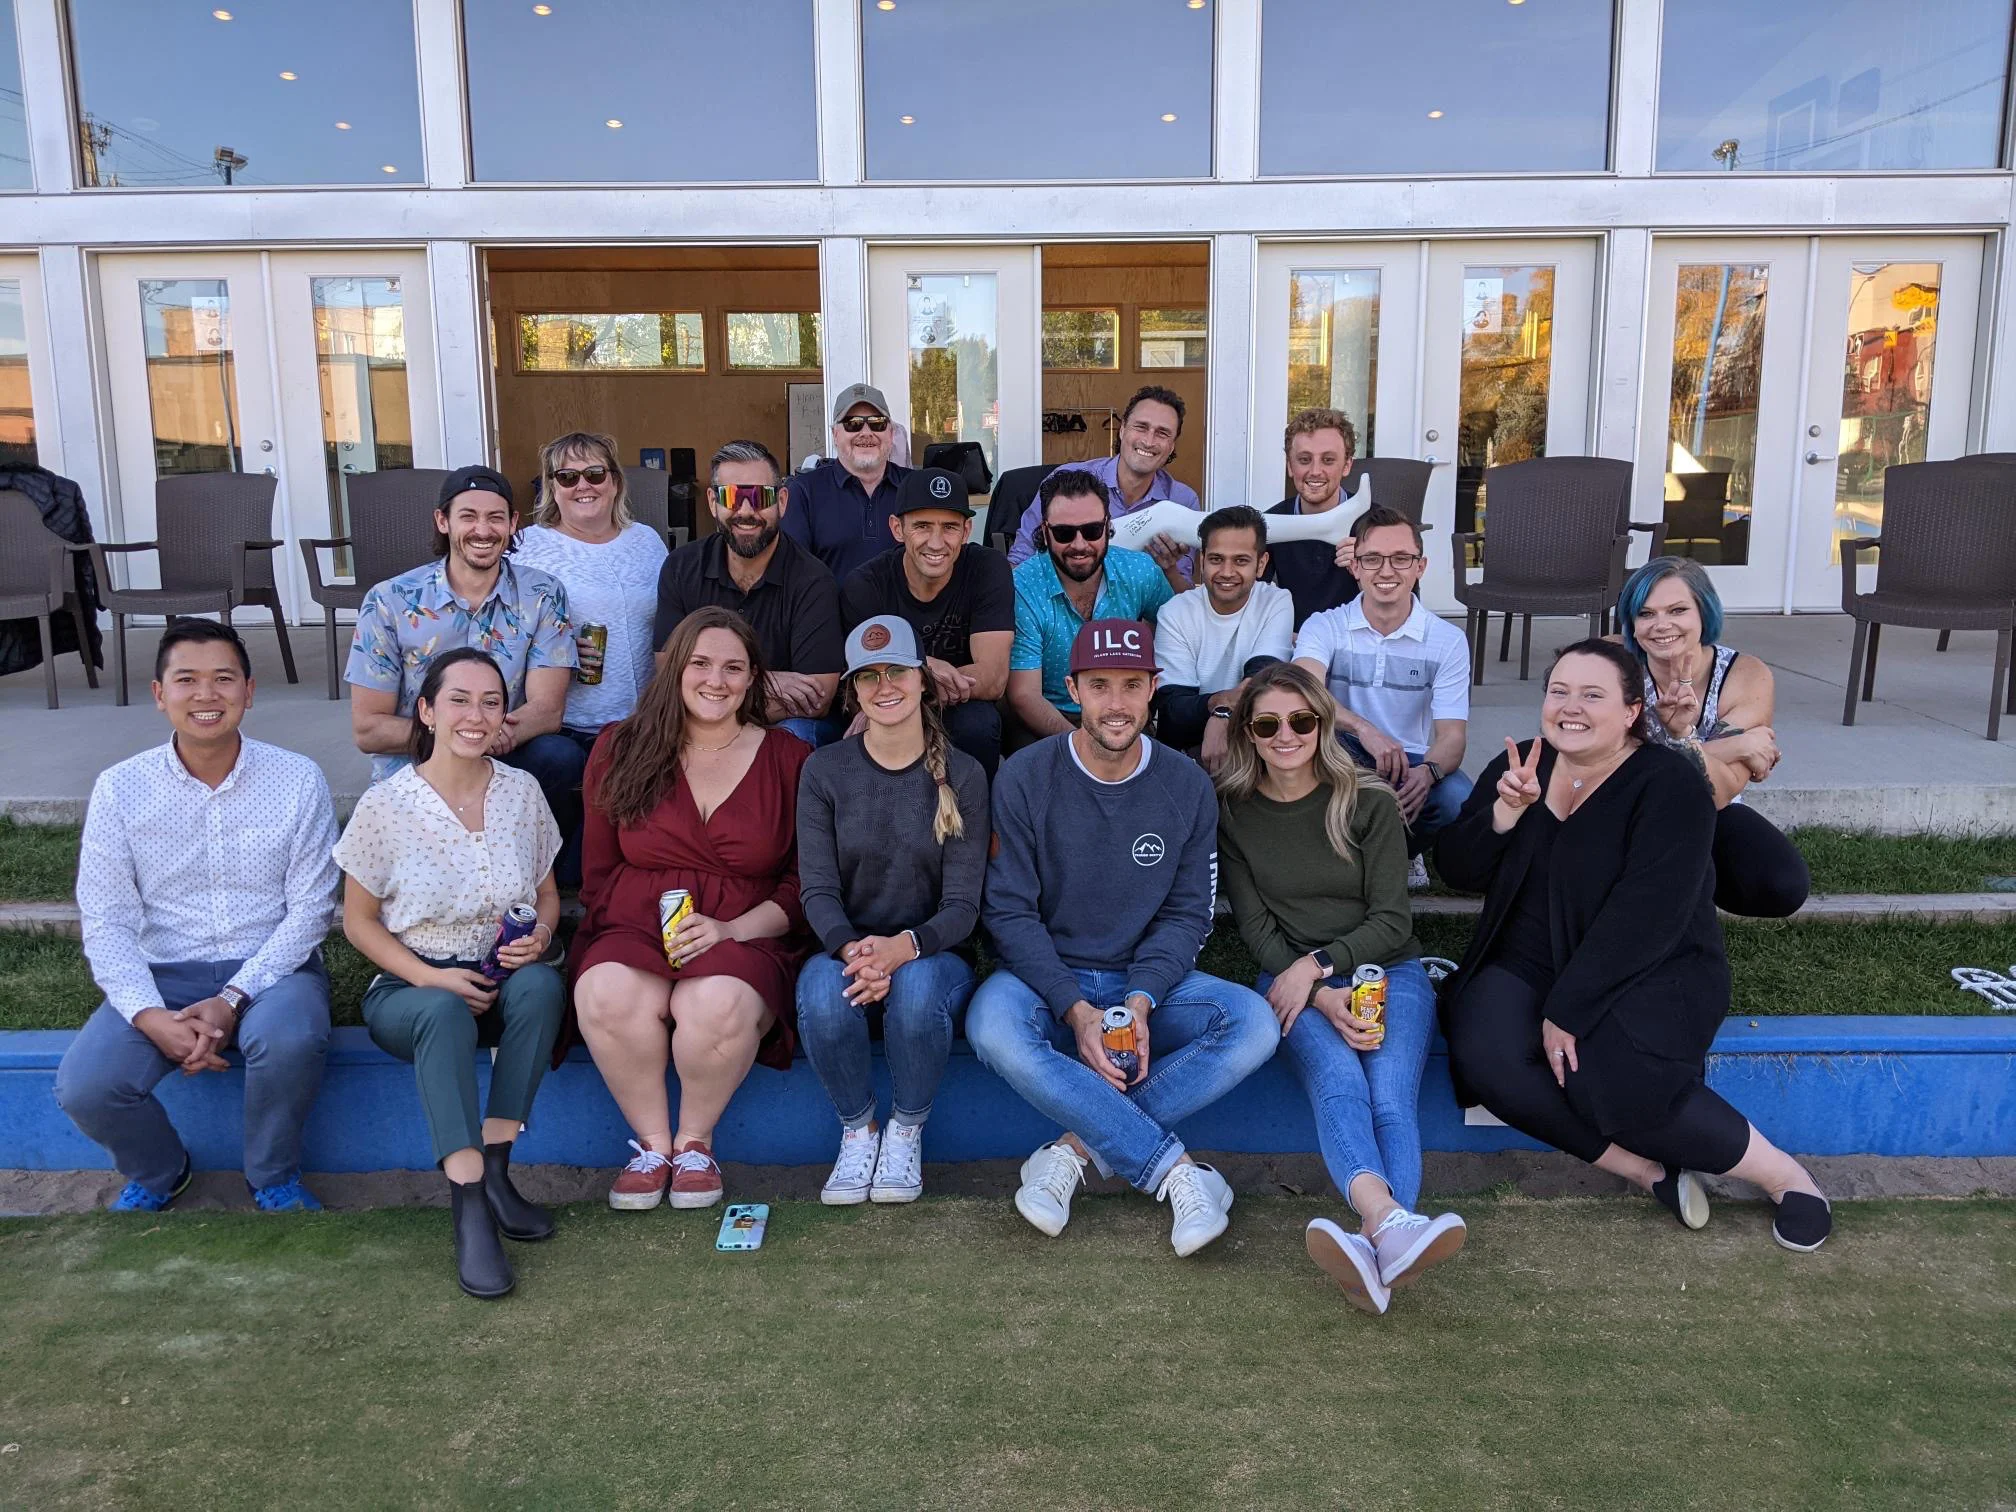 A group photo of the 360 team at a company event. The photo shows 18 people grouped together in 3 rows. The photo was taken at a lawn bowling tournament.